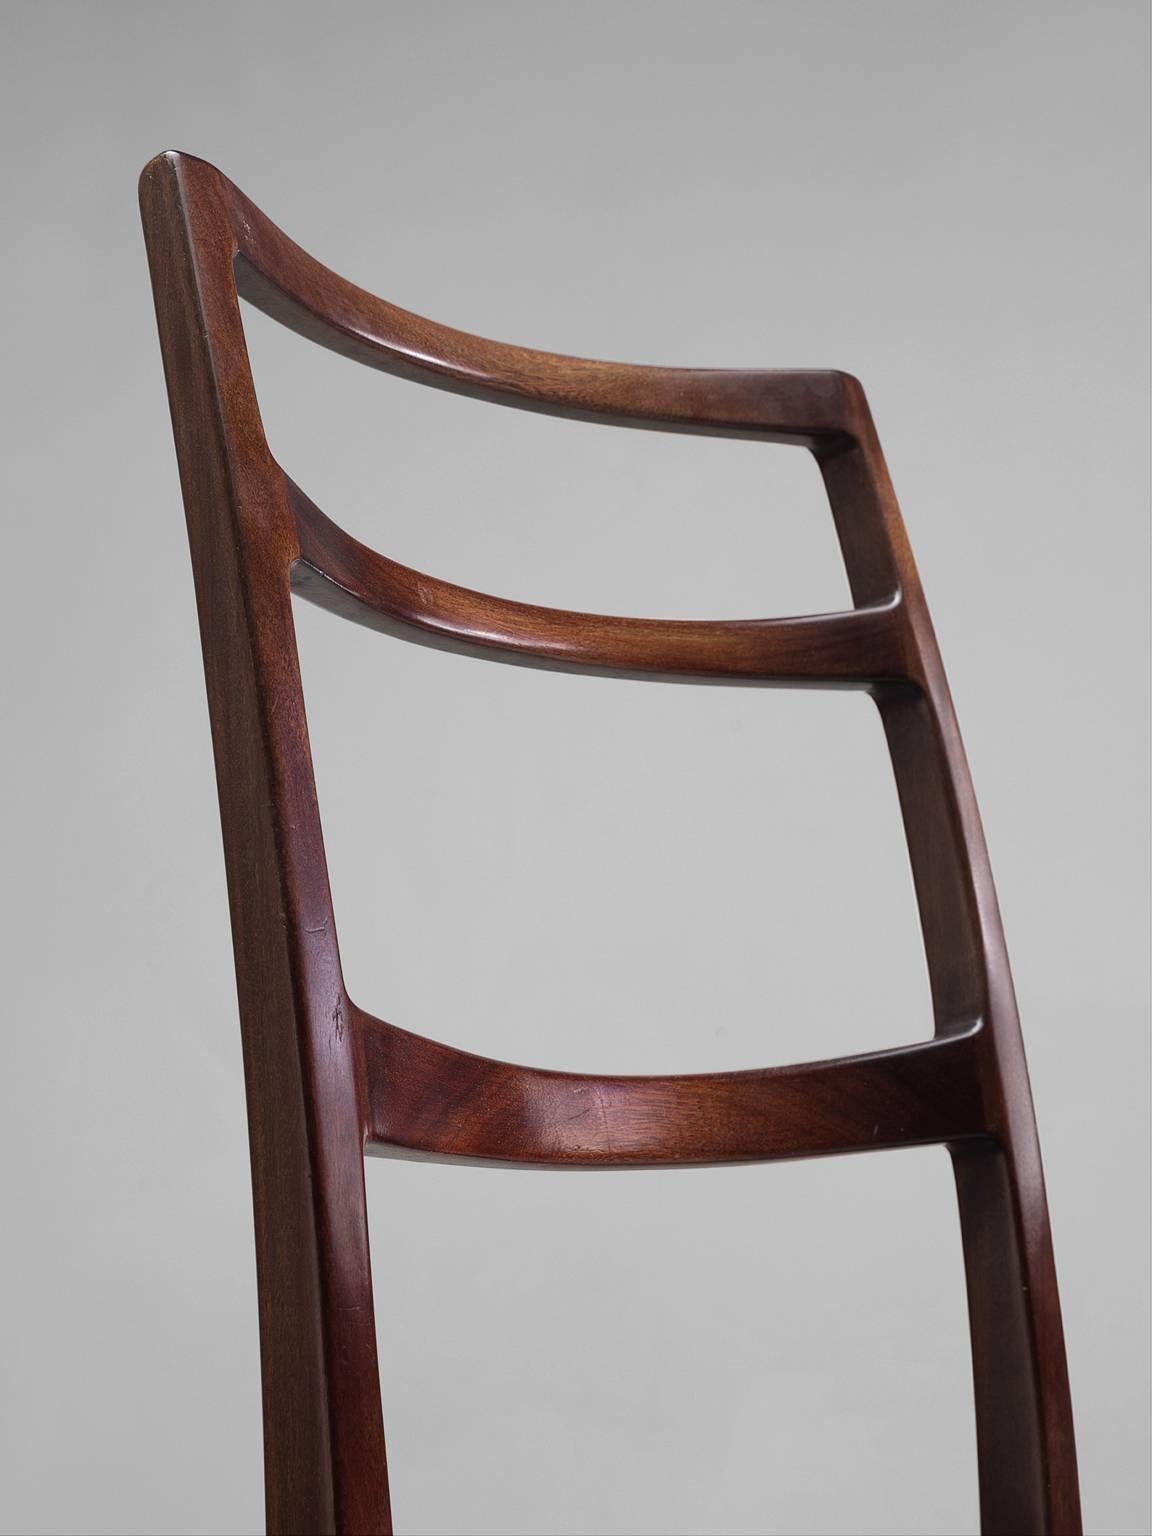 Mid-20th Century Gunni Omann Danish Dining Chairs in Original Leather and Mahogany